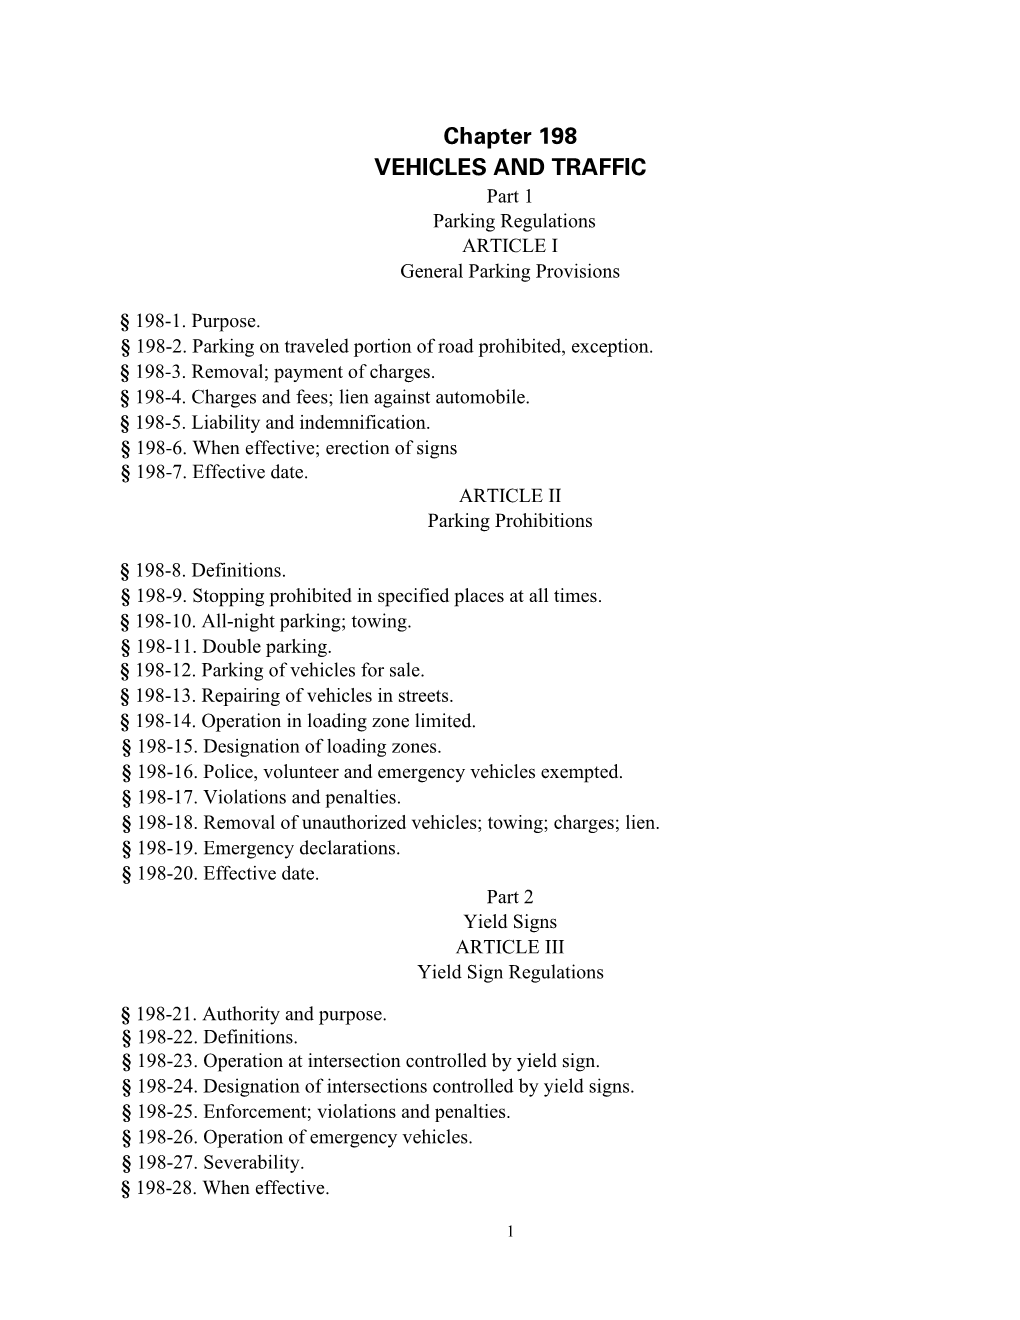 Chapter 198 VEHICLES and TRAFFIC Part 1 Parking Regulations ARTICLE I General Parking Provisions